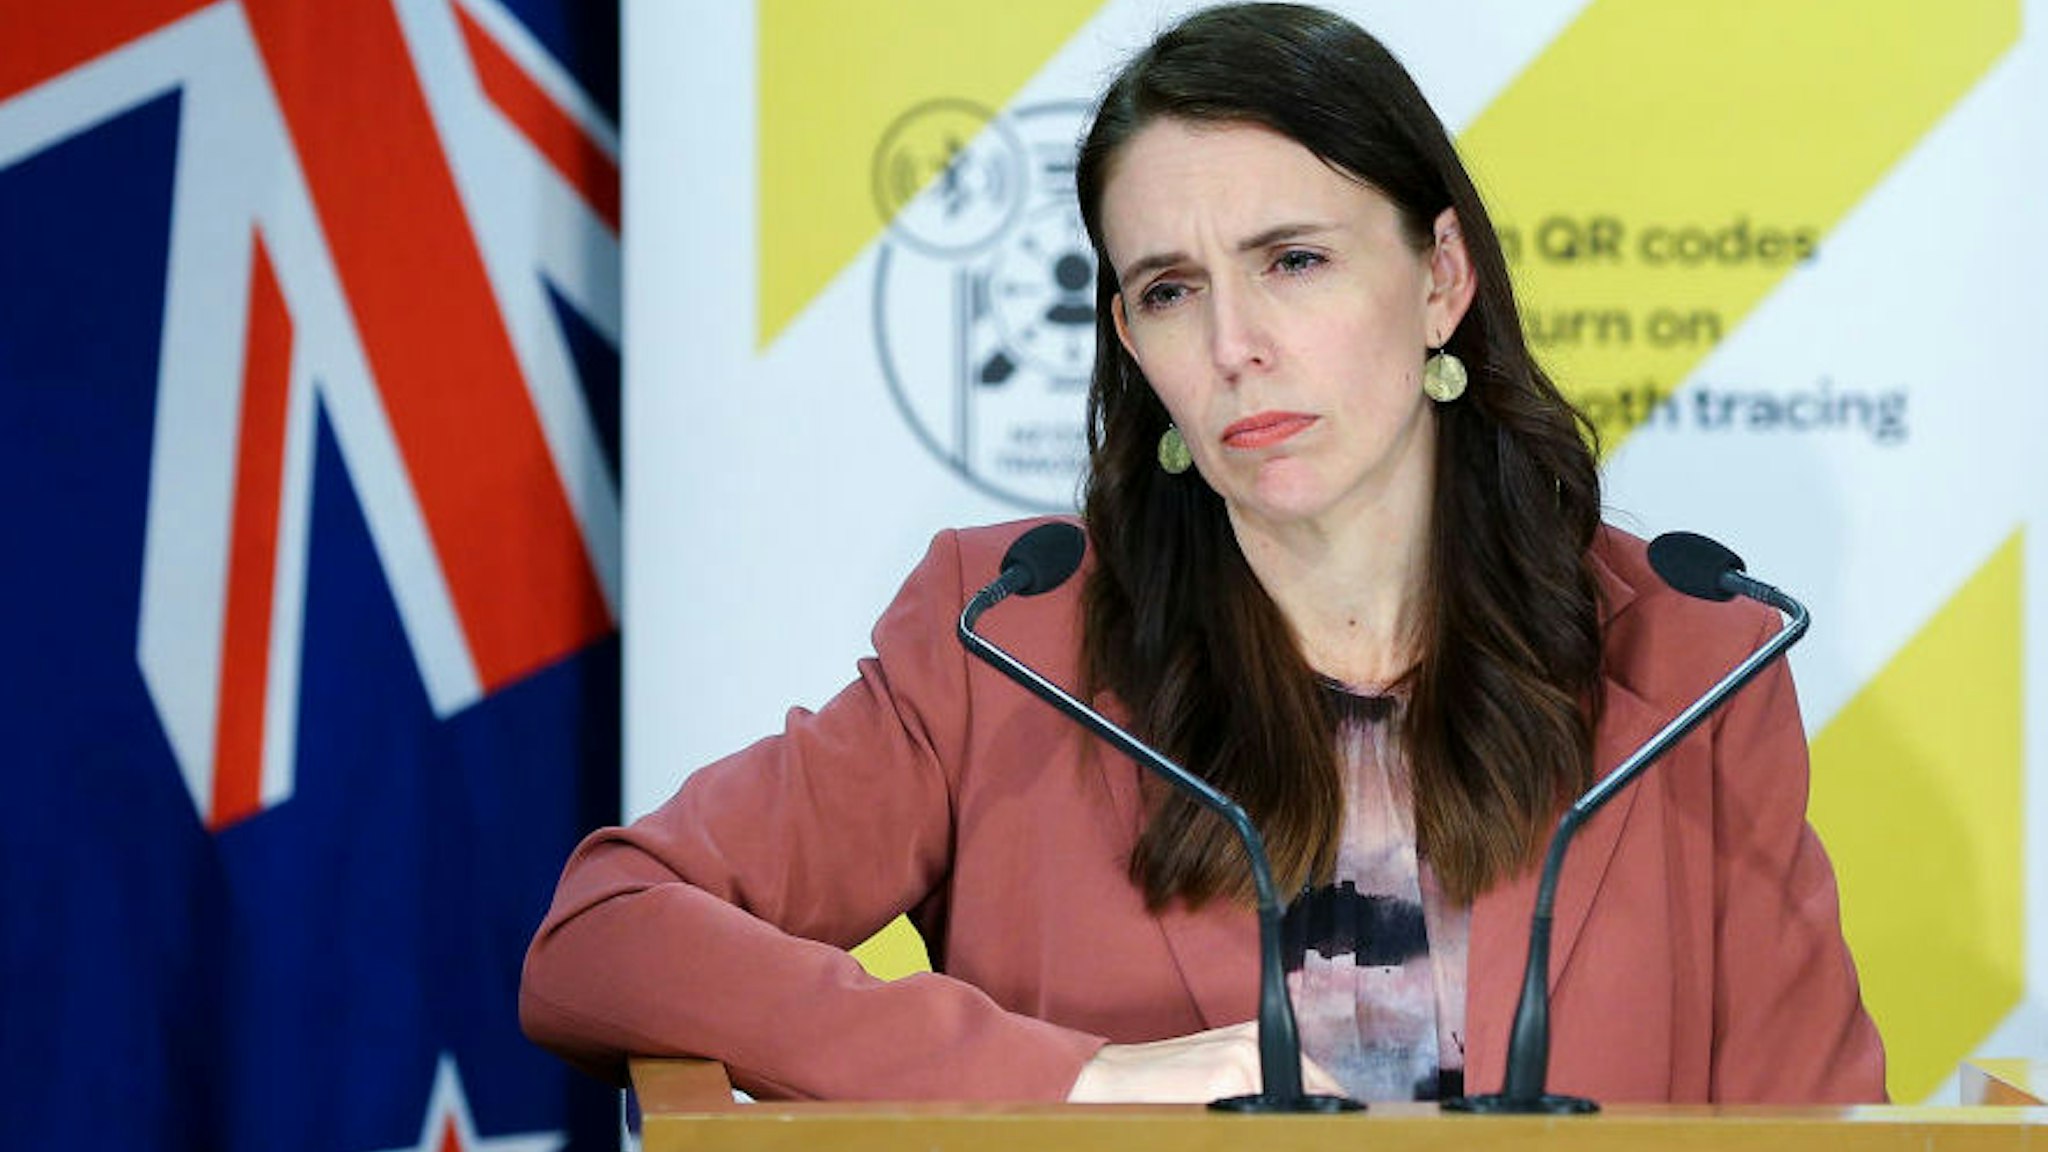 Prime Minister Jacinda Ardern looks on during a press conference at Parliament on August 17, 2021 in Wellington, New Zealand.